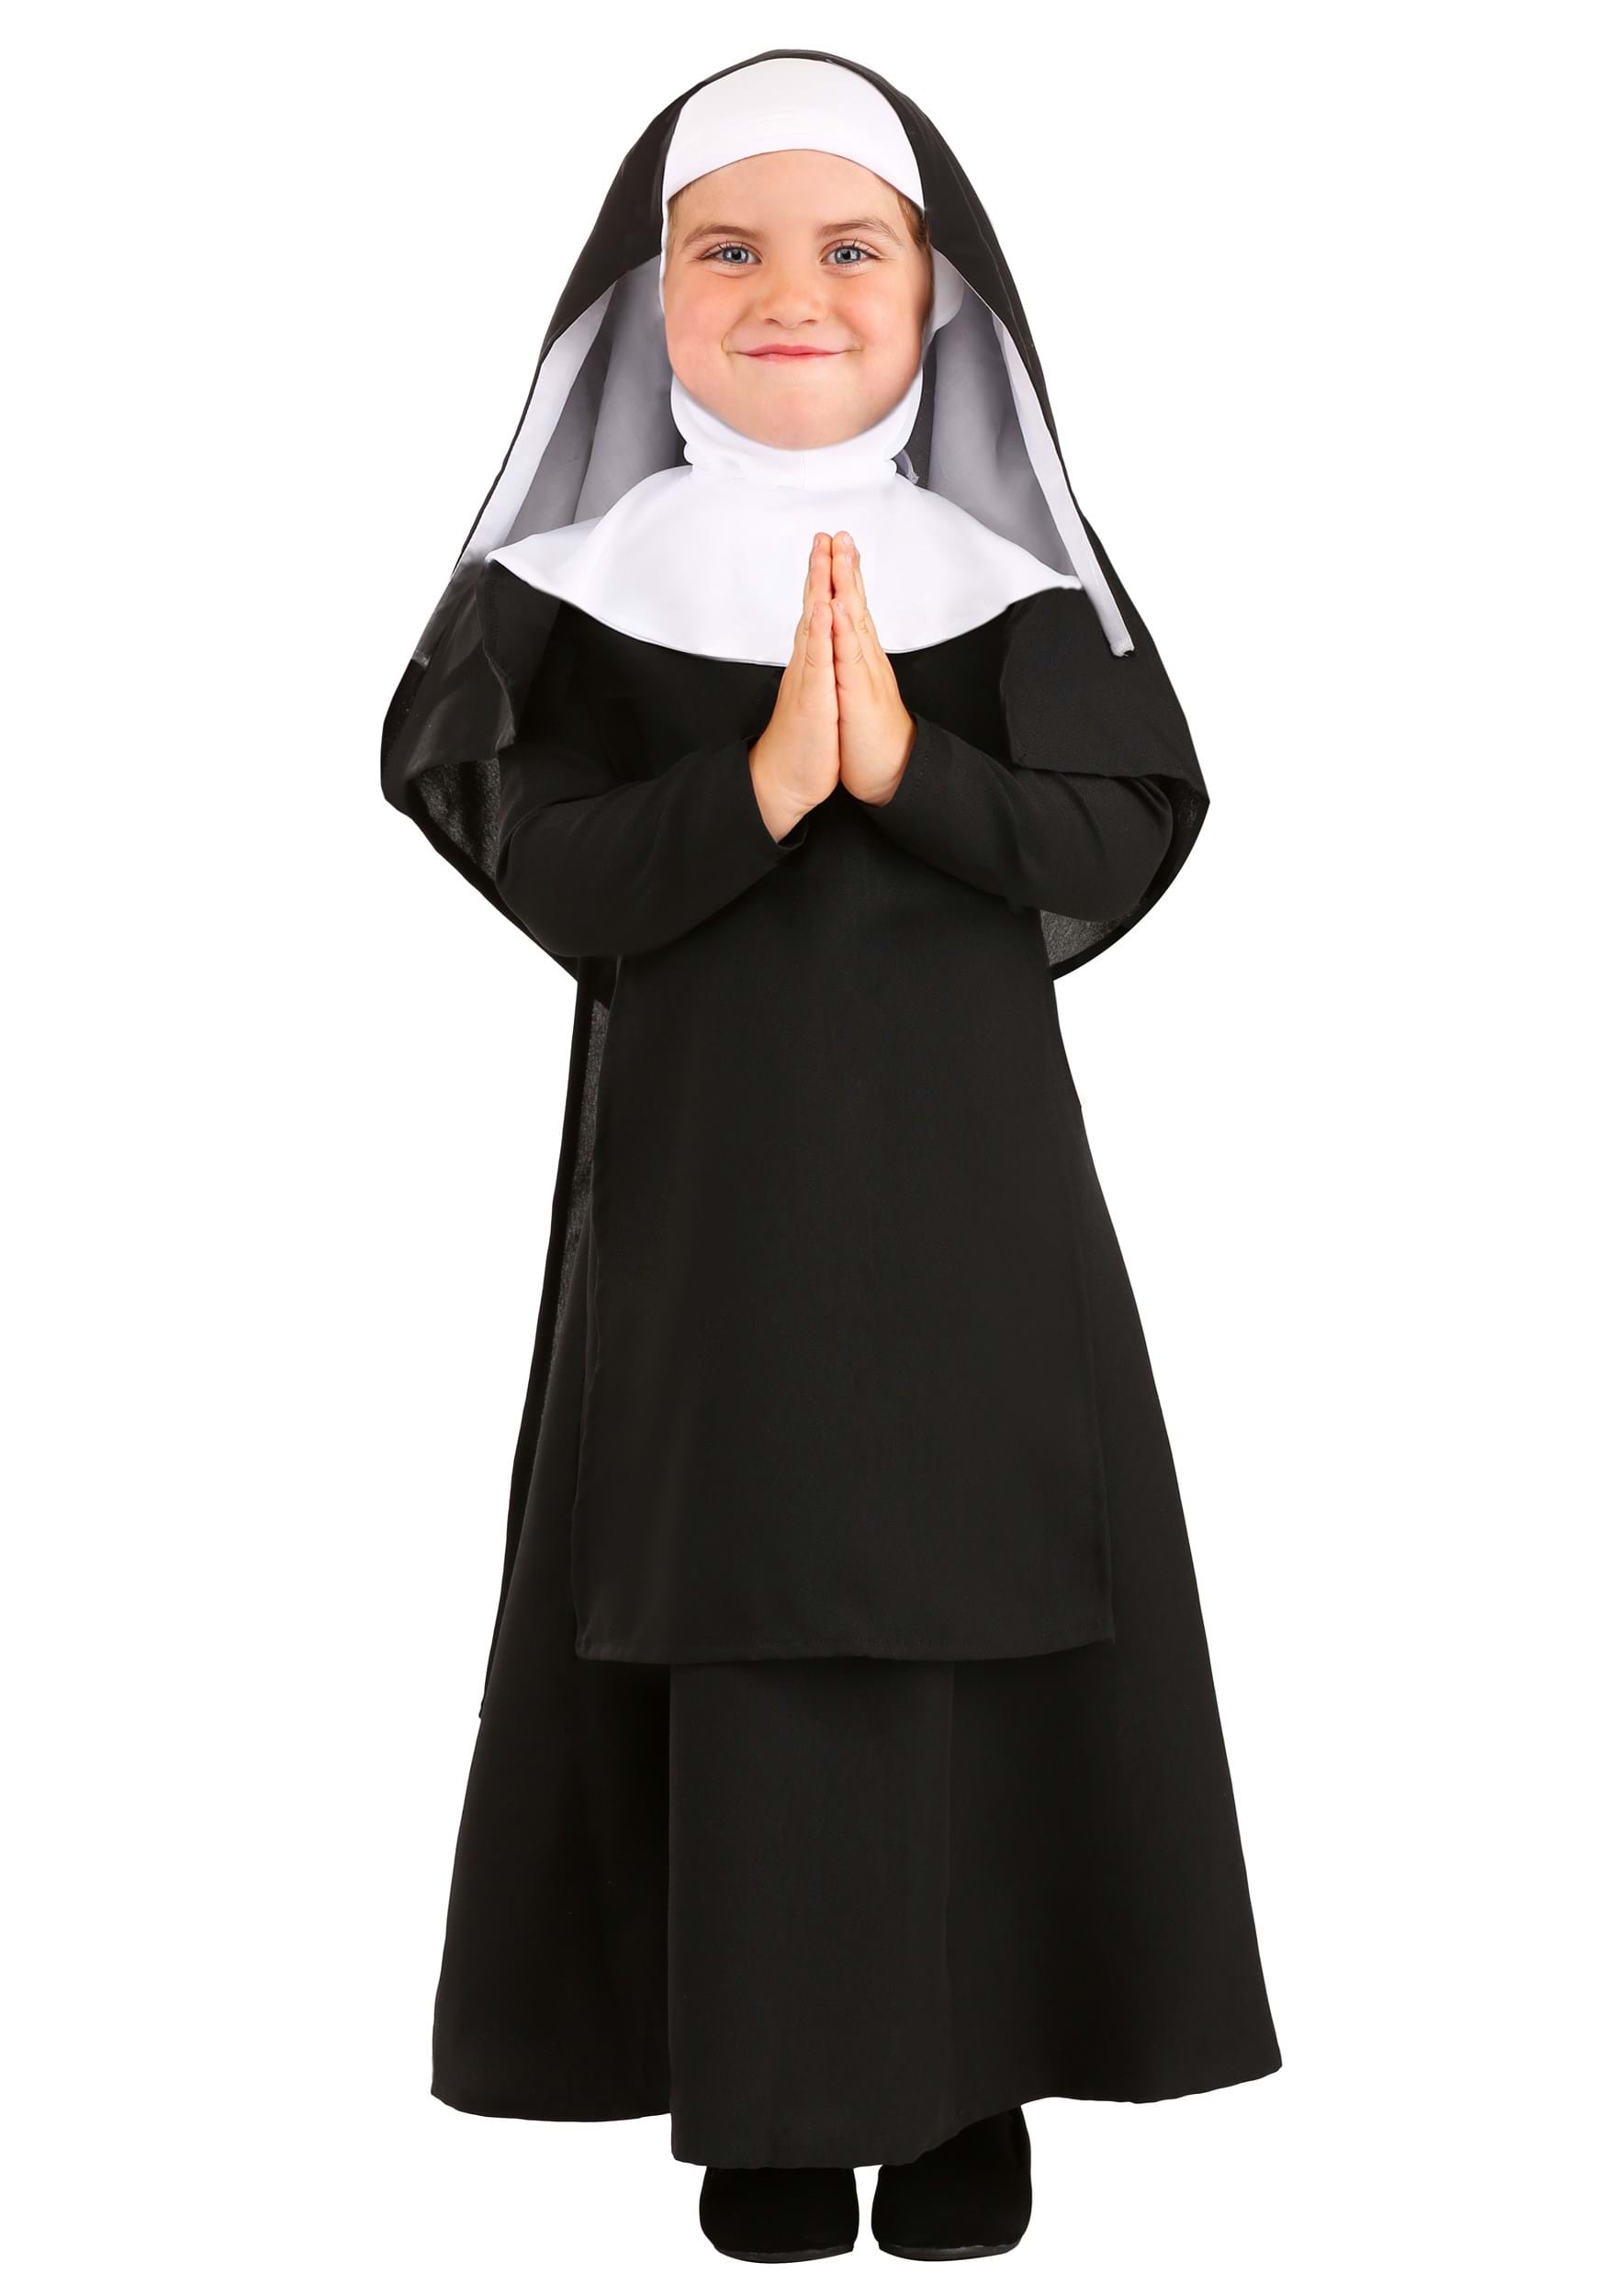 Photos - Fancy Dress Deluxe FUN Costumes  Nun Costume for Toddlers Black/White FUN2935TD 